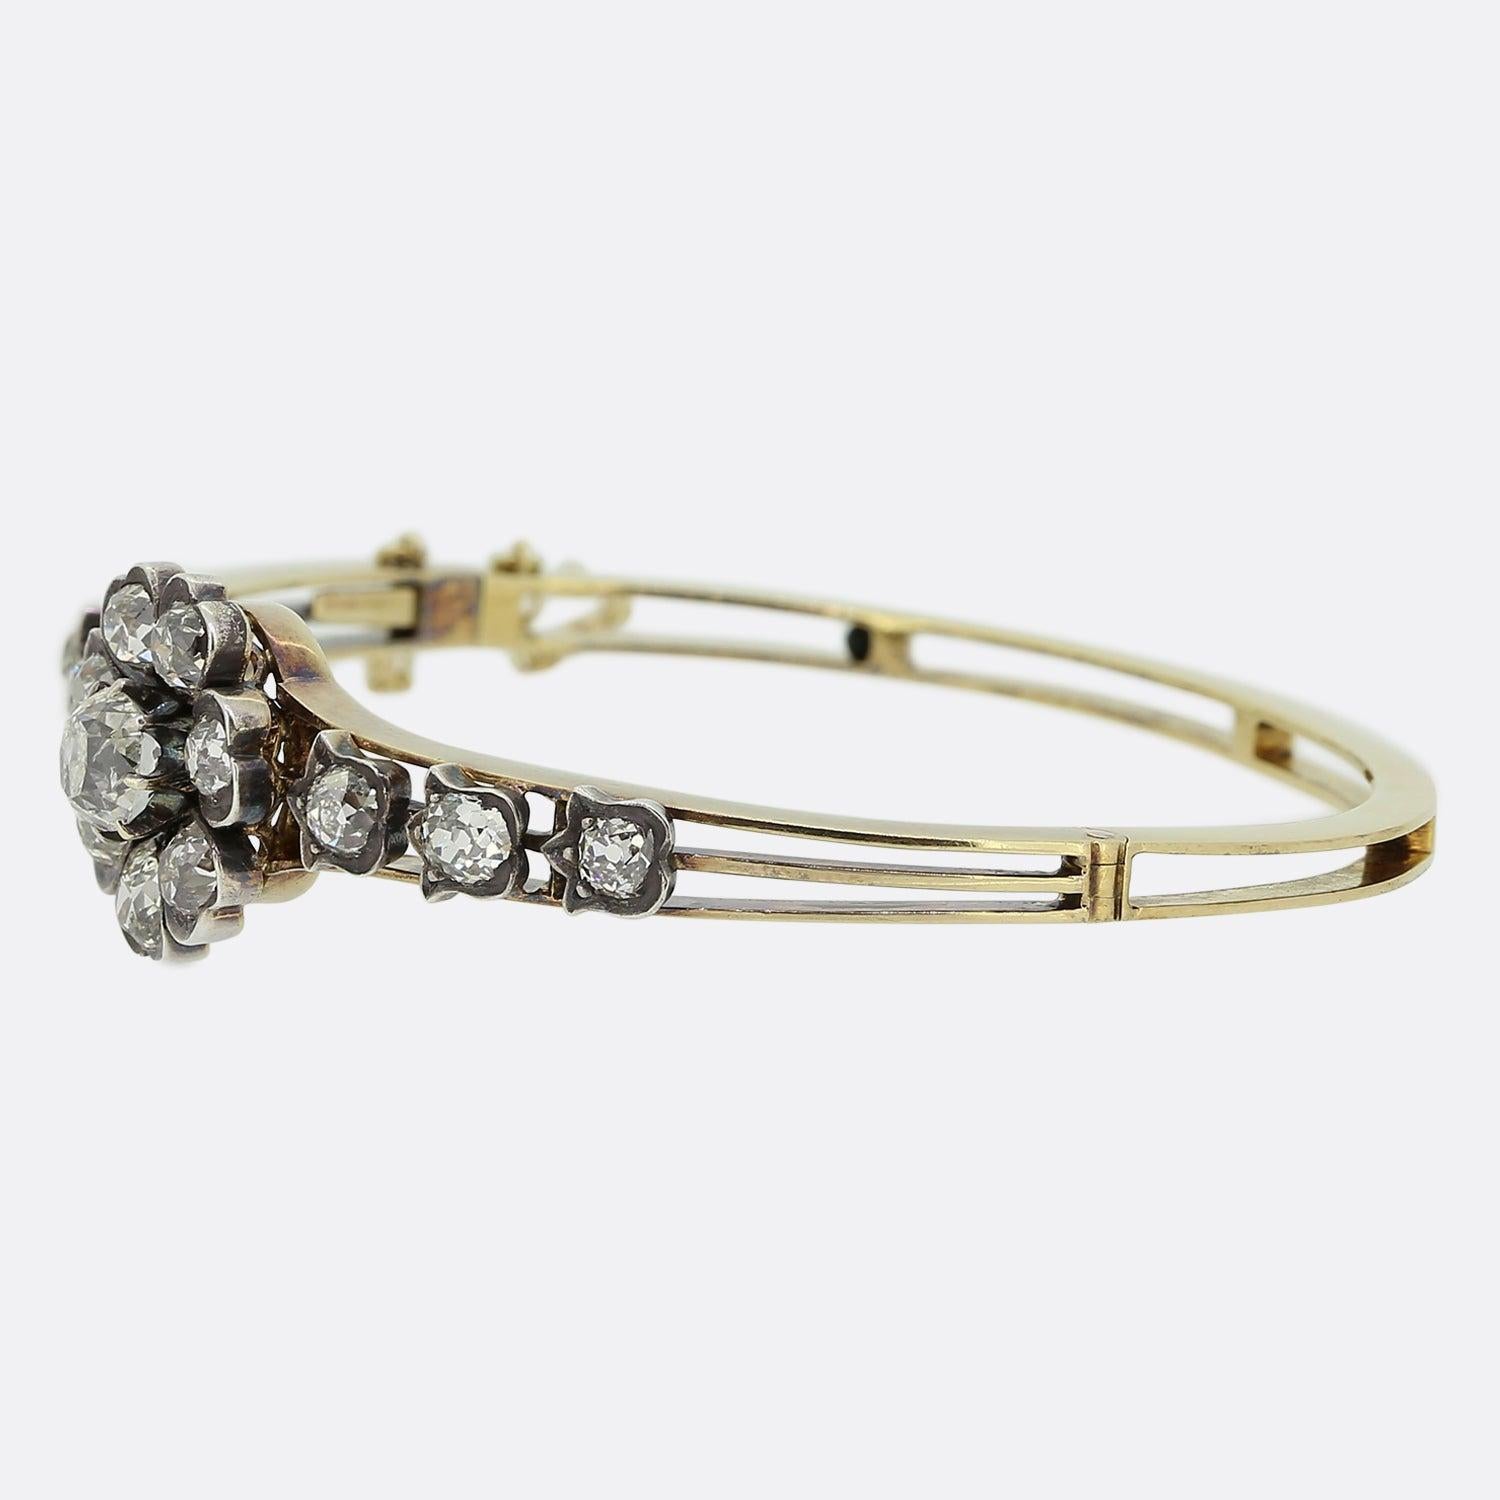 Here we have a marvellous diamond bangle that dates back to the Victorian era. The focal point of the bangle is a stunning chunky 1.15 carat old mine cut diamond that is surrounded by seven well matched old cut diamonds. It has a floral theme and